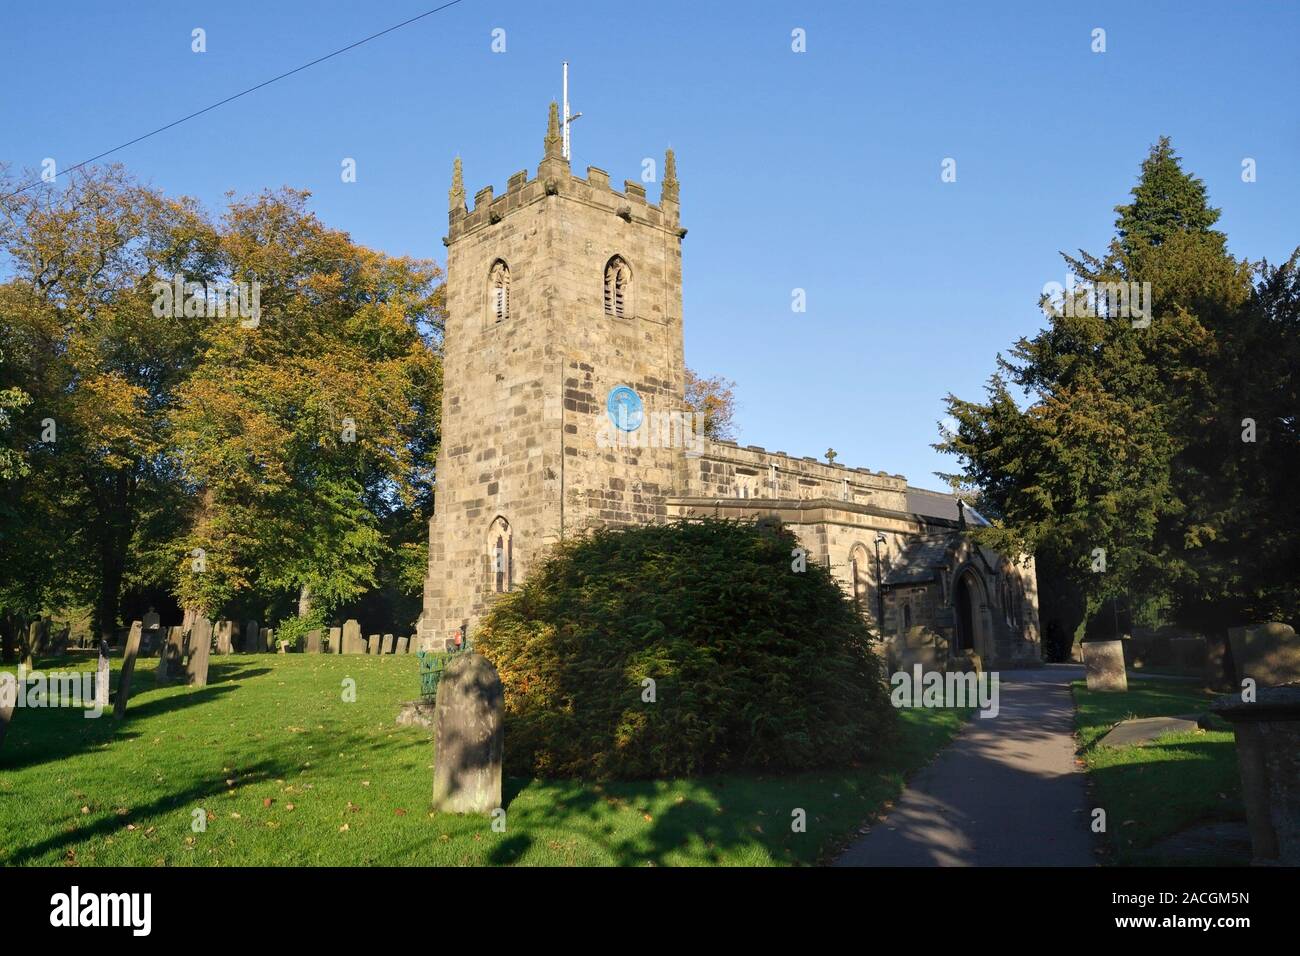 The Parish Church of St Lawrence in Eyam in Derbyshire England UK, English rural village church grade II* listed building Stock Photo